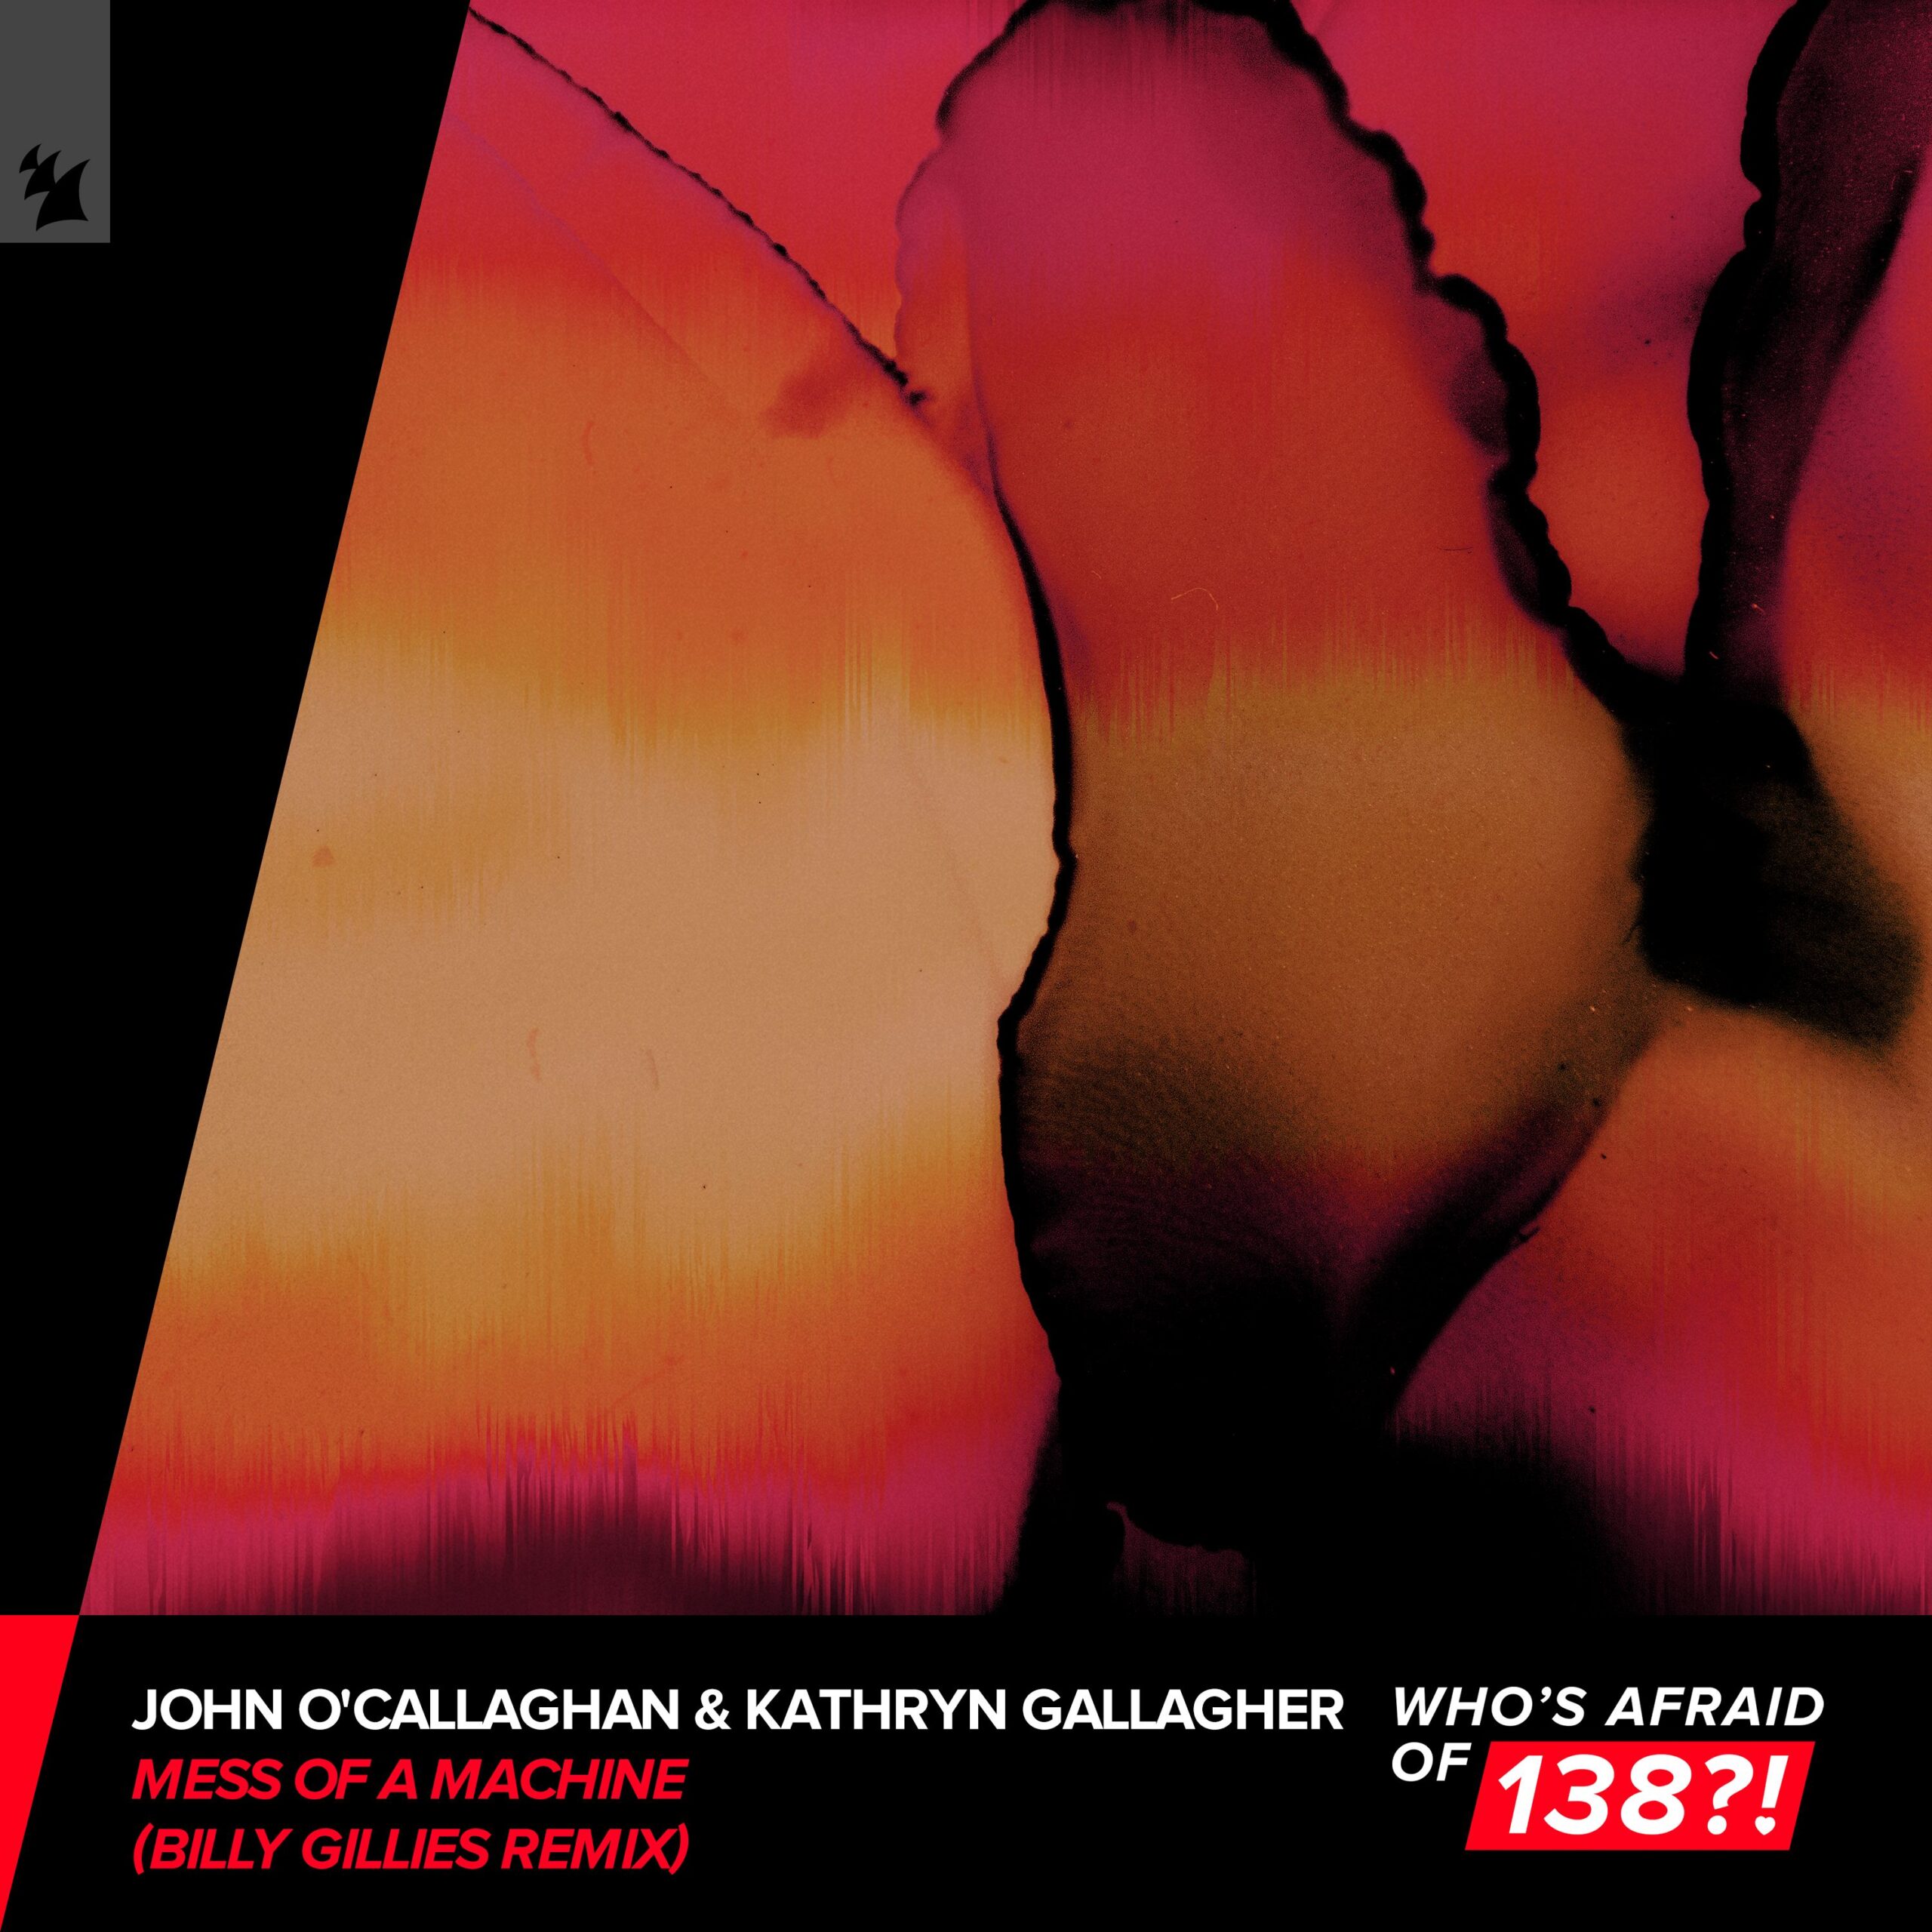 John O'Callaghan and Kathryn Gallagher presents Mess Of A Machine (Billy Gillies Remix) on Who's Afraid Of 138?! / Armada Music